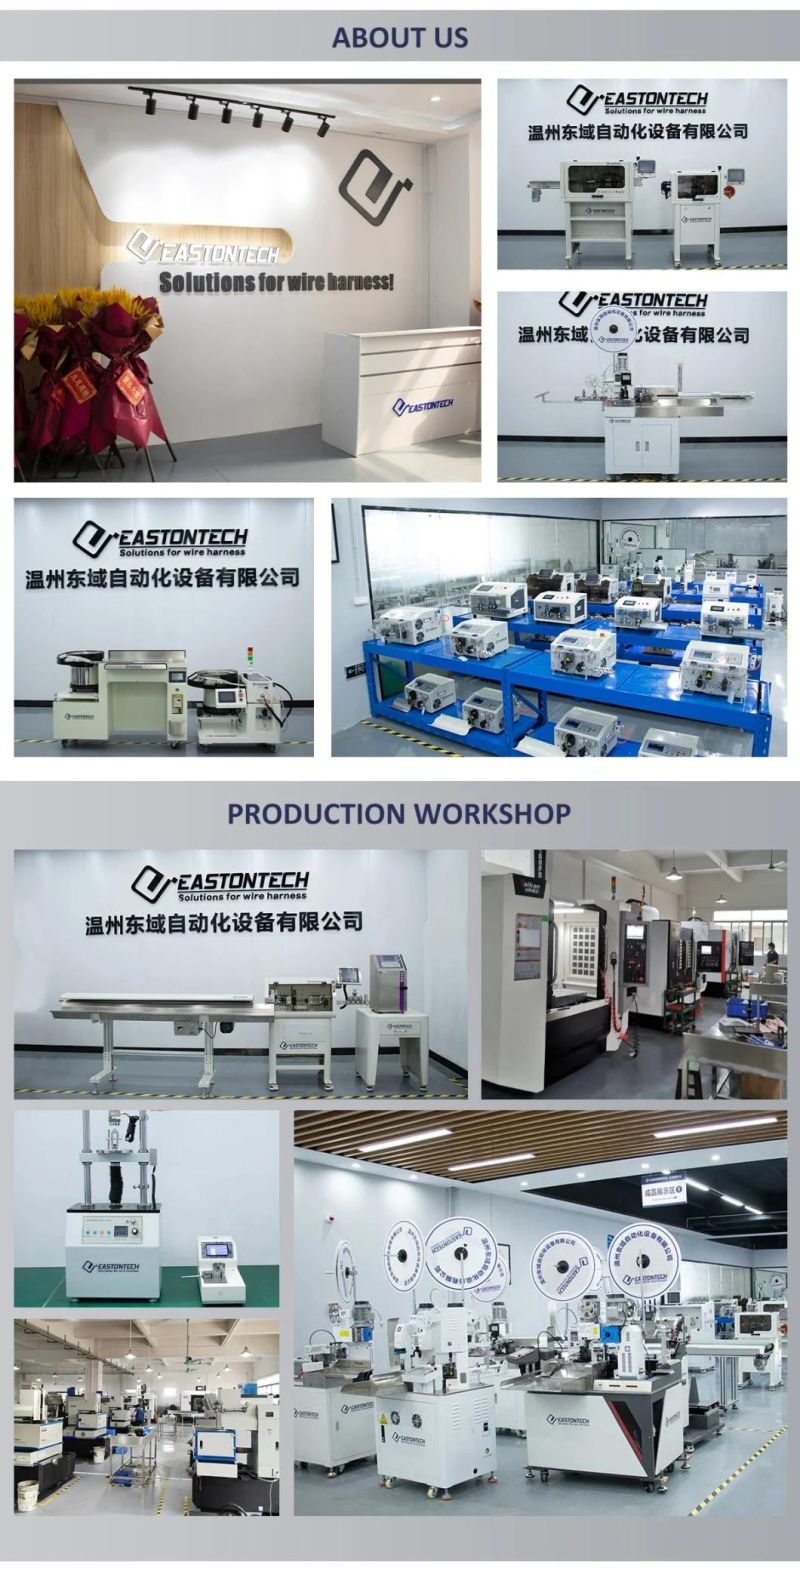 Eastontech Ew-05A Automatic Cable Cutting Wire Stripping Machine Machine for Cable USB Machines for Assembly USB Cable